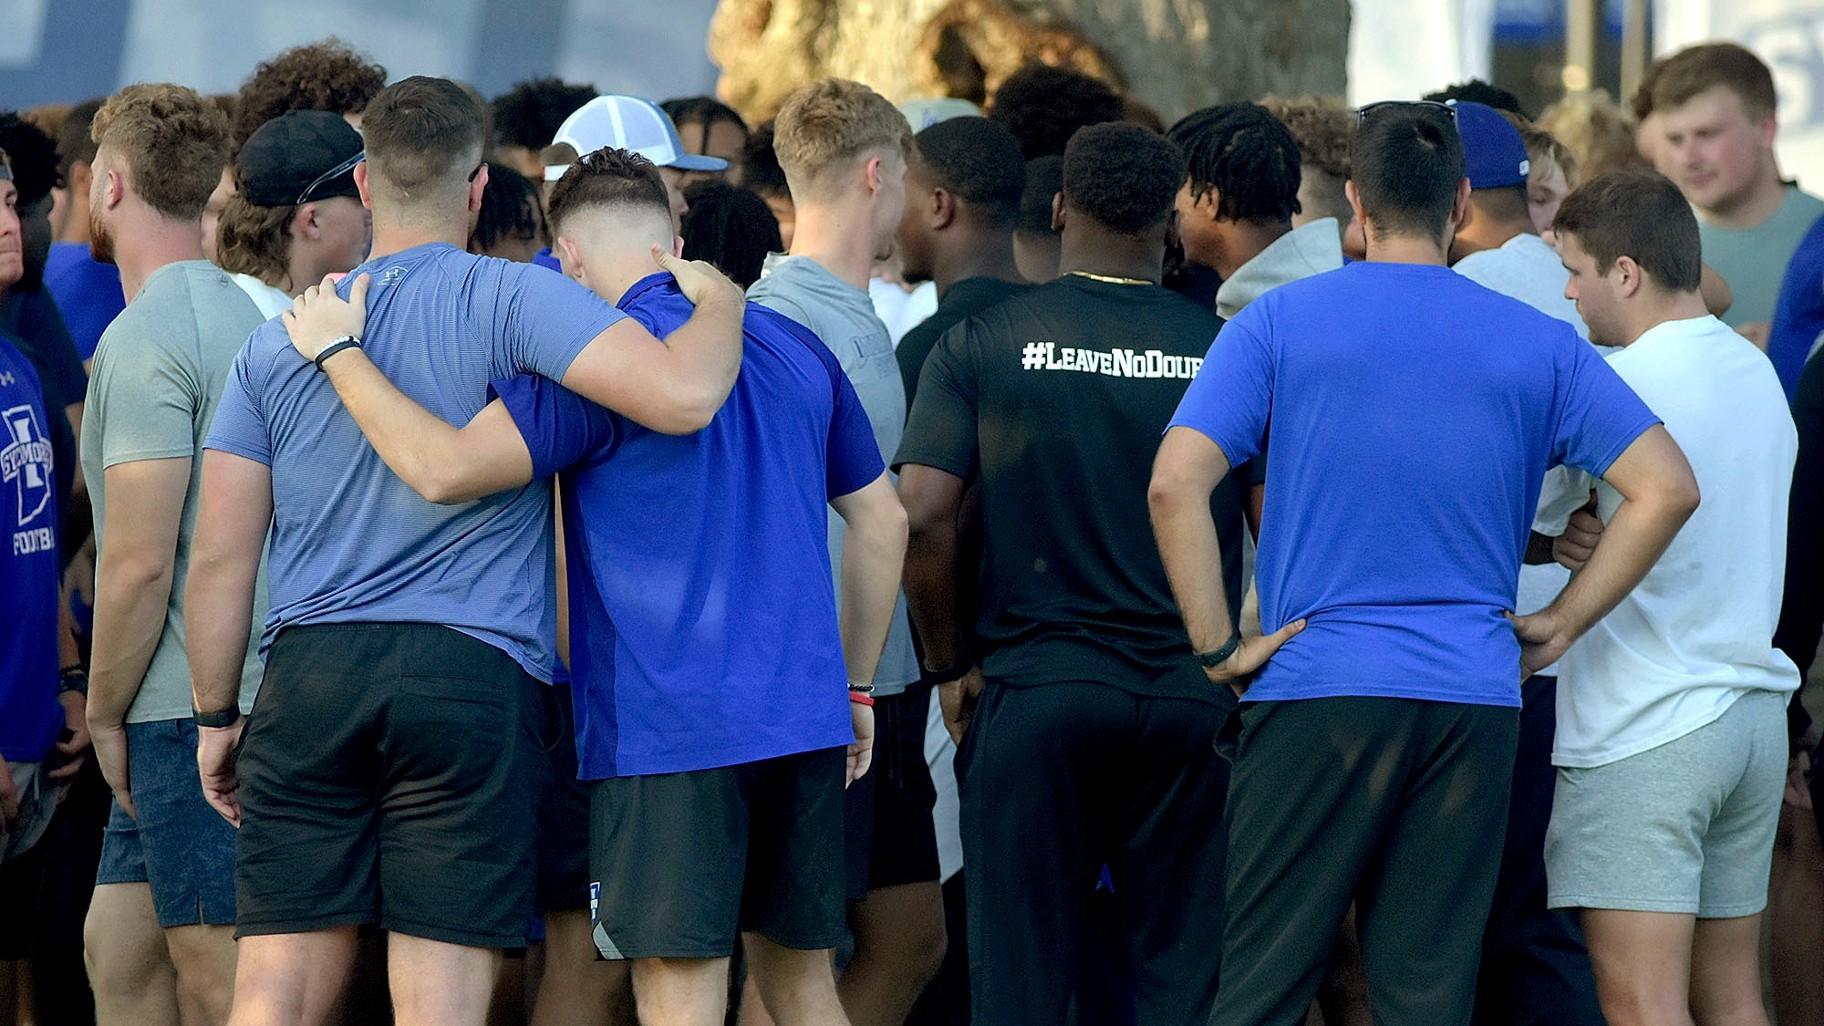 Members of the Indiana State football team console one another after a vigil at Memorial Stadium in Terre Haute, Ind., on Sunday, Aug. 21, 2022, for students, including fellow football players, who were involved in a car crash earlier in the day. (Joseph C. Garza / The Tribune-Star via AP)